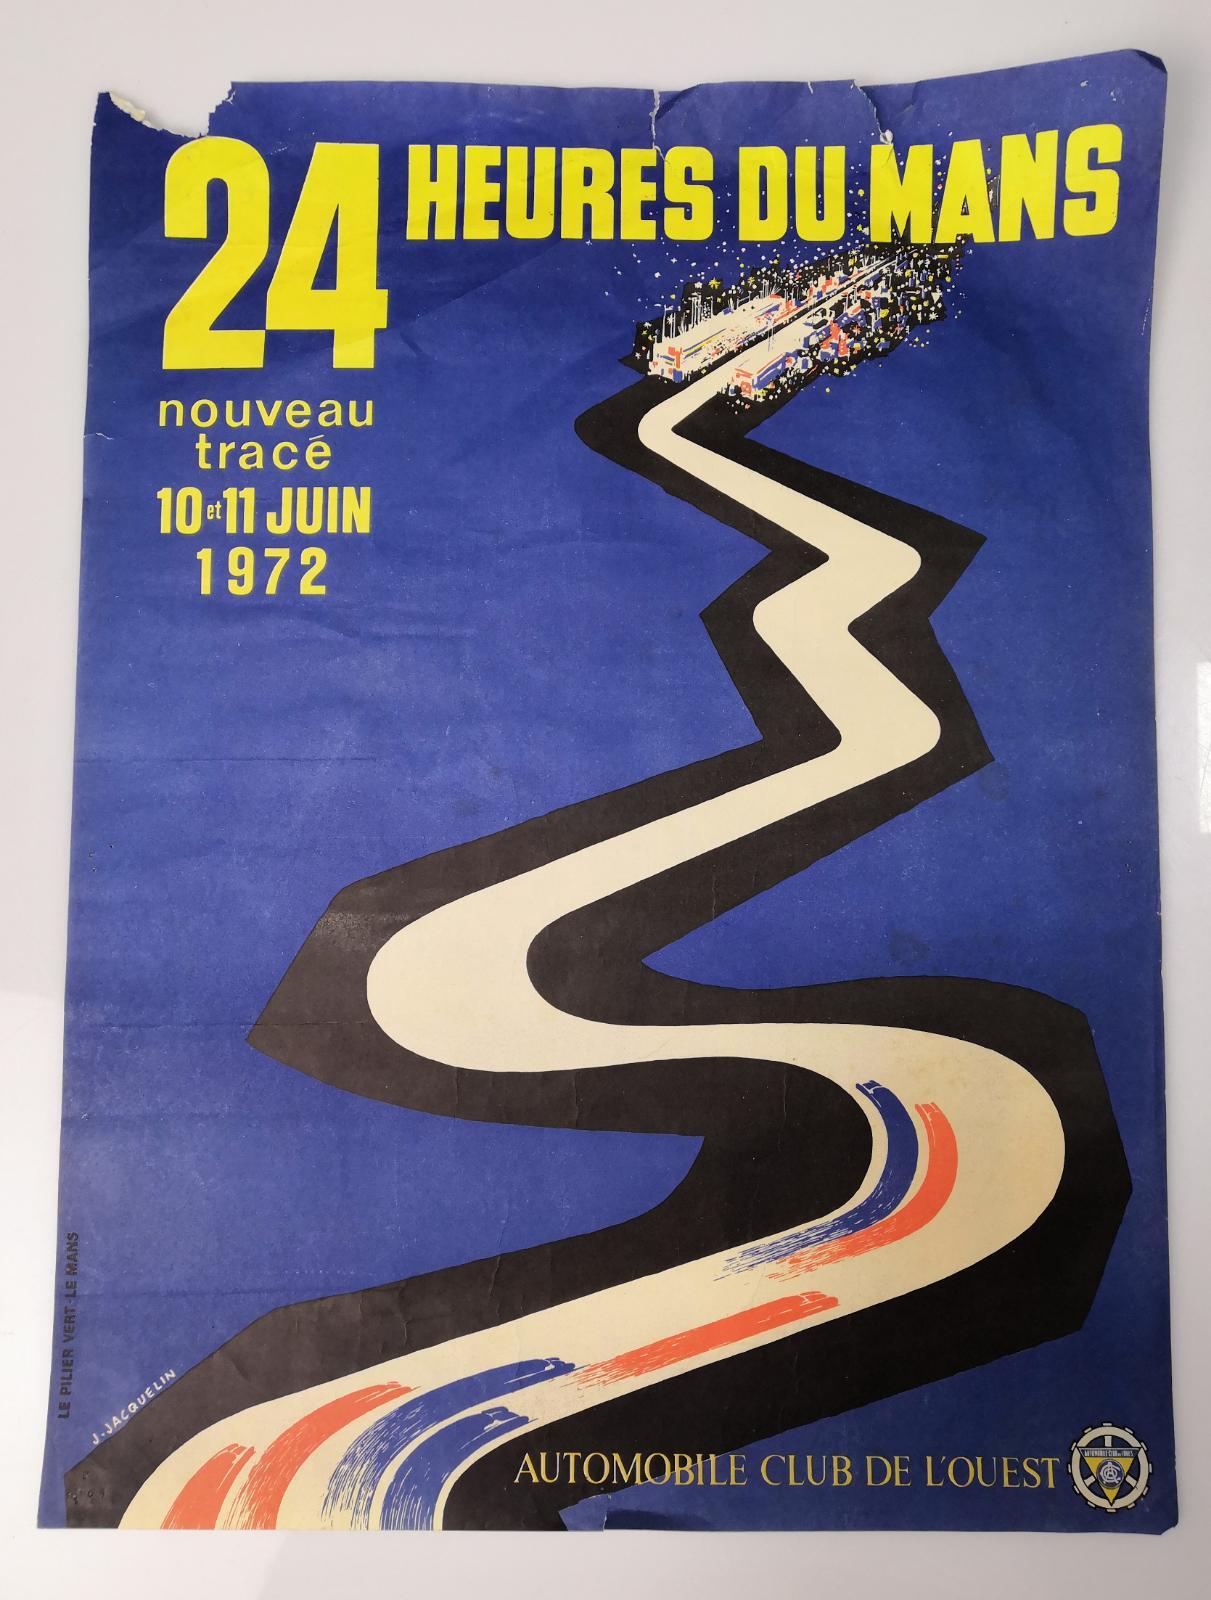 Fantastic original mid-century poster designed by French artist Jean Jacquelin for the legendary 1972 24 Hours of Le Mans race, held June 10-11. The race was won by Henri Pescarolo and the great Graham Hill driving for Matra. Jacquelin represented